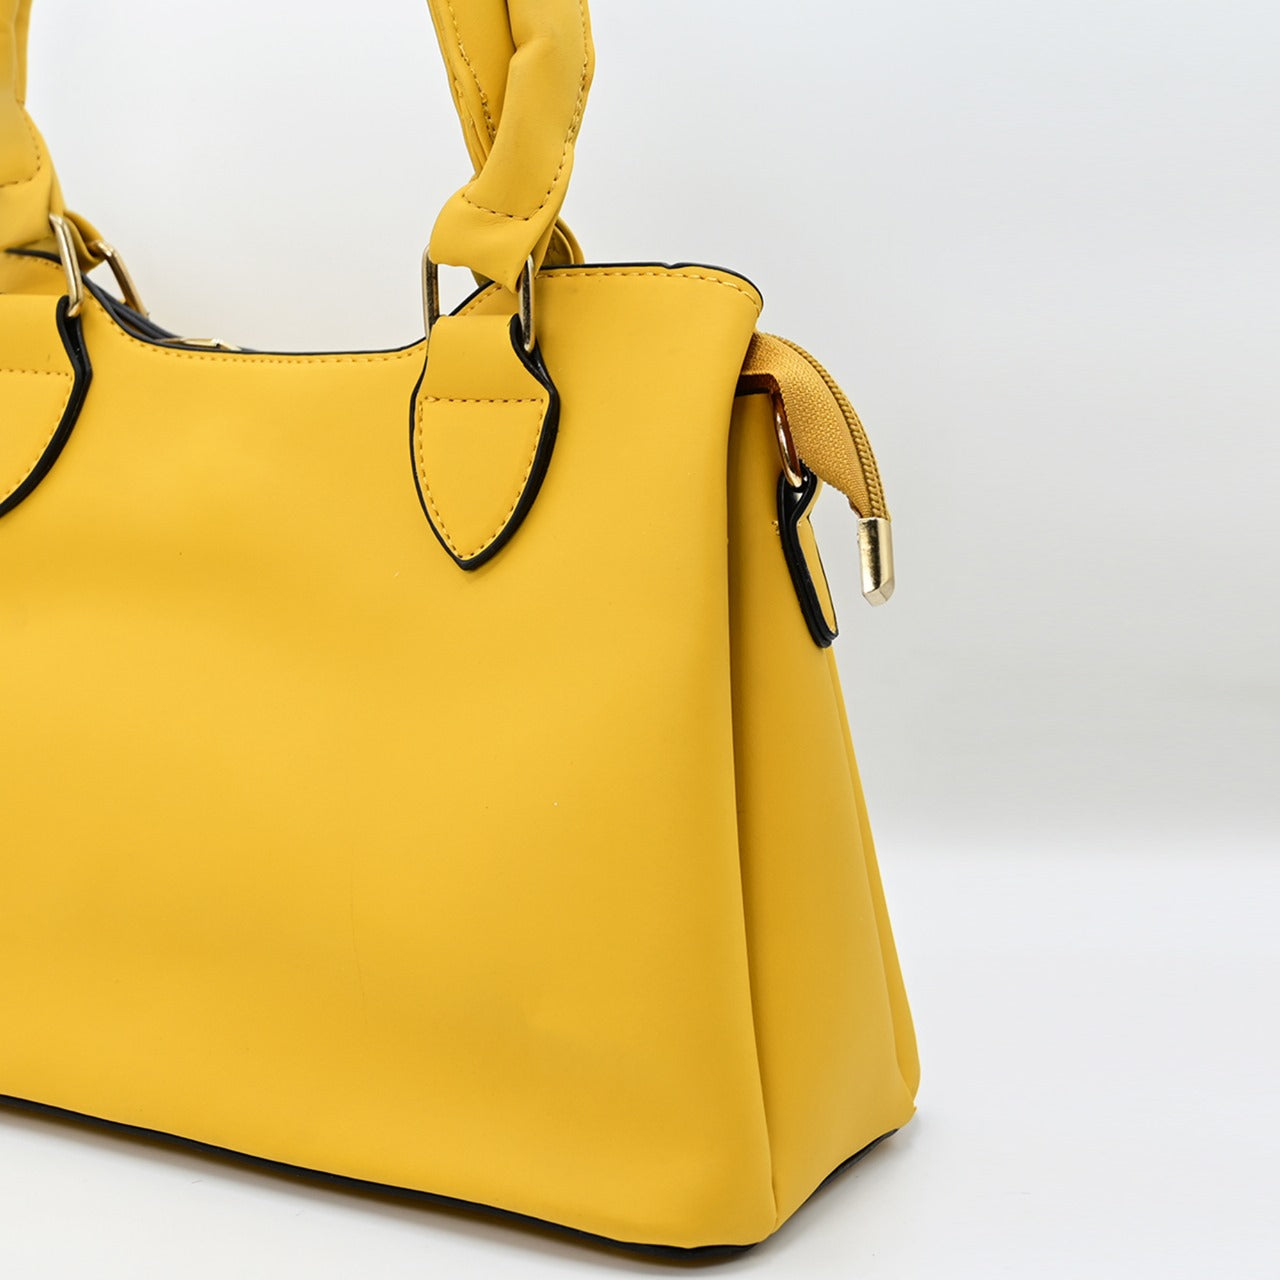 Imported Bag Article in Yellow Code 1